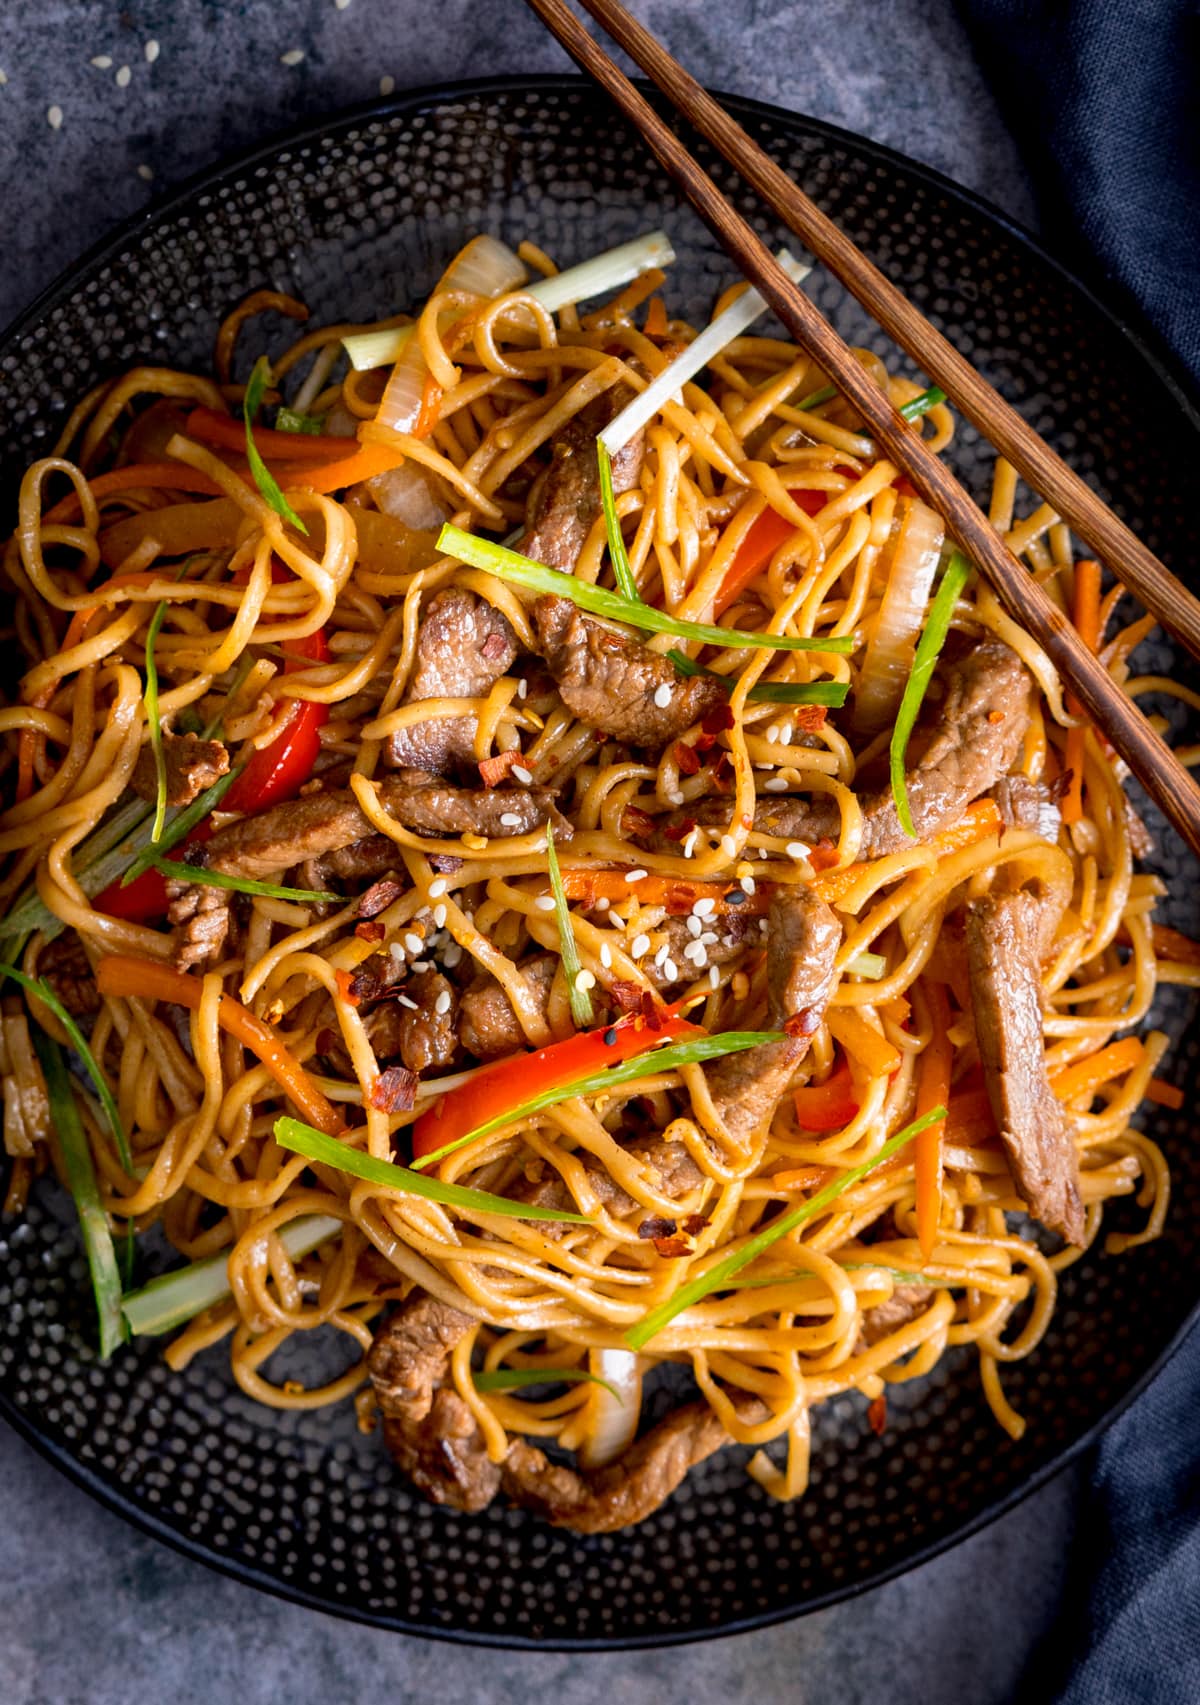 Tall overhead image of beef teriyaki noodle stir fry on a black plate. There is a pair of wooden chopsticks resting on the plate. The plate is on a grey background.